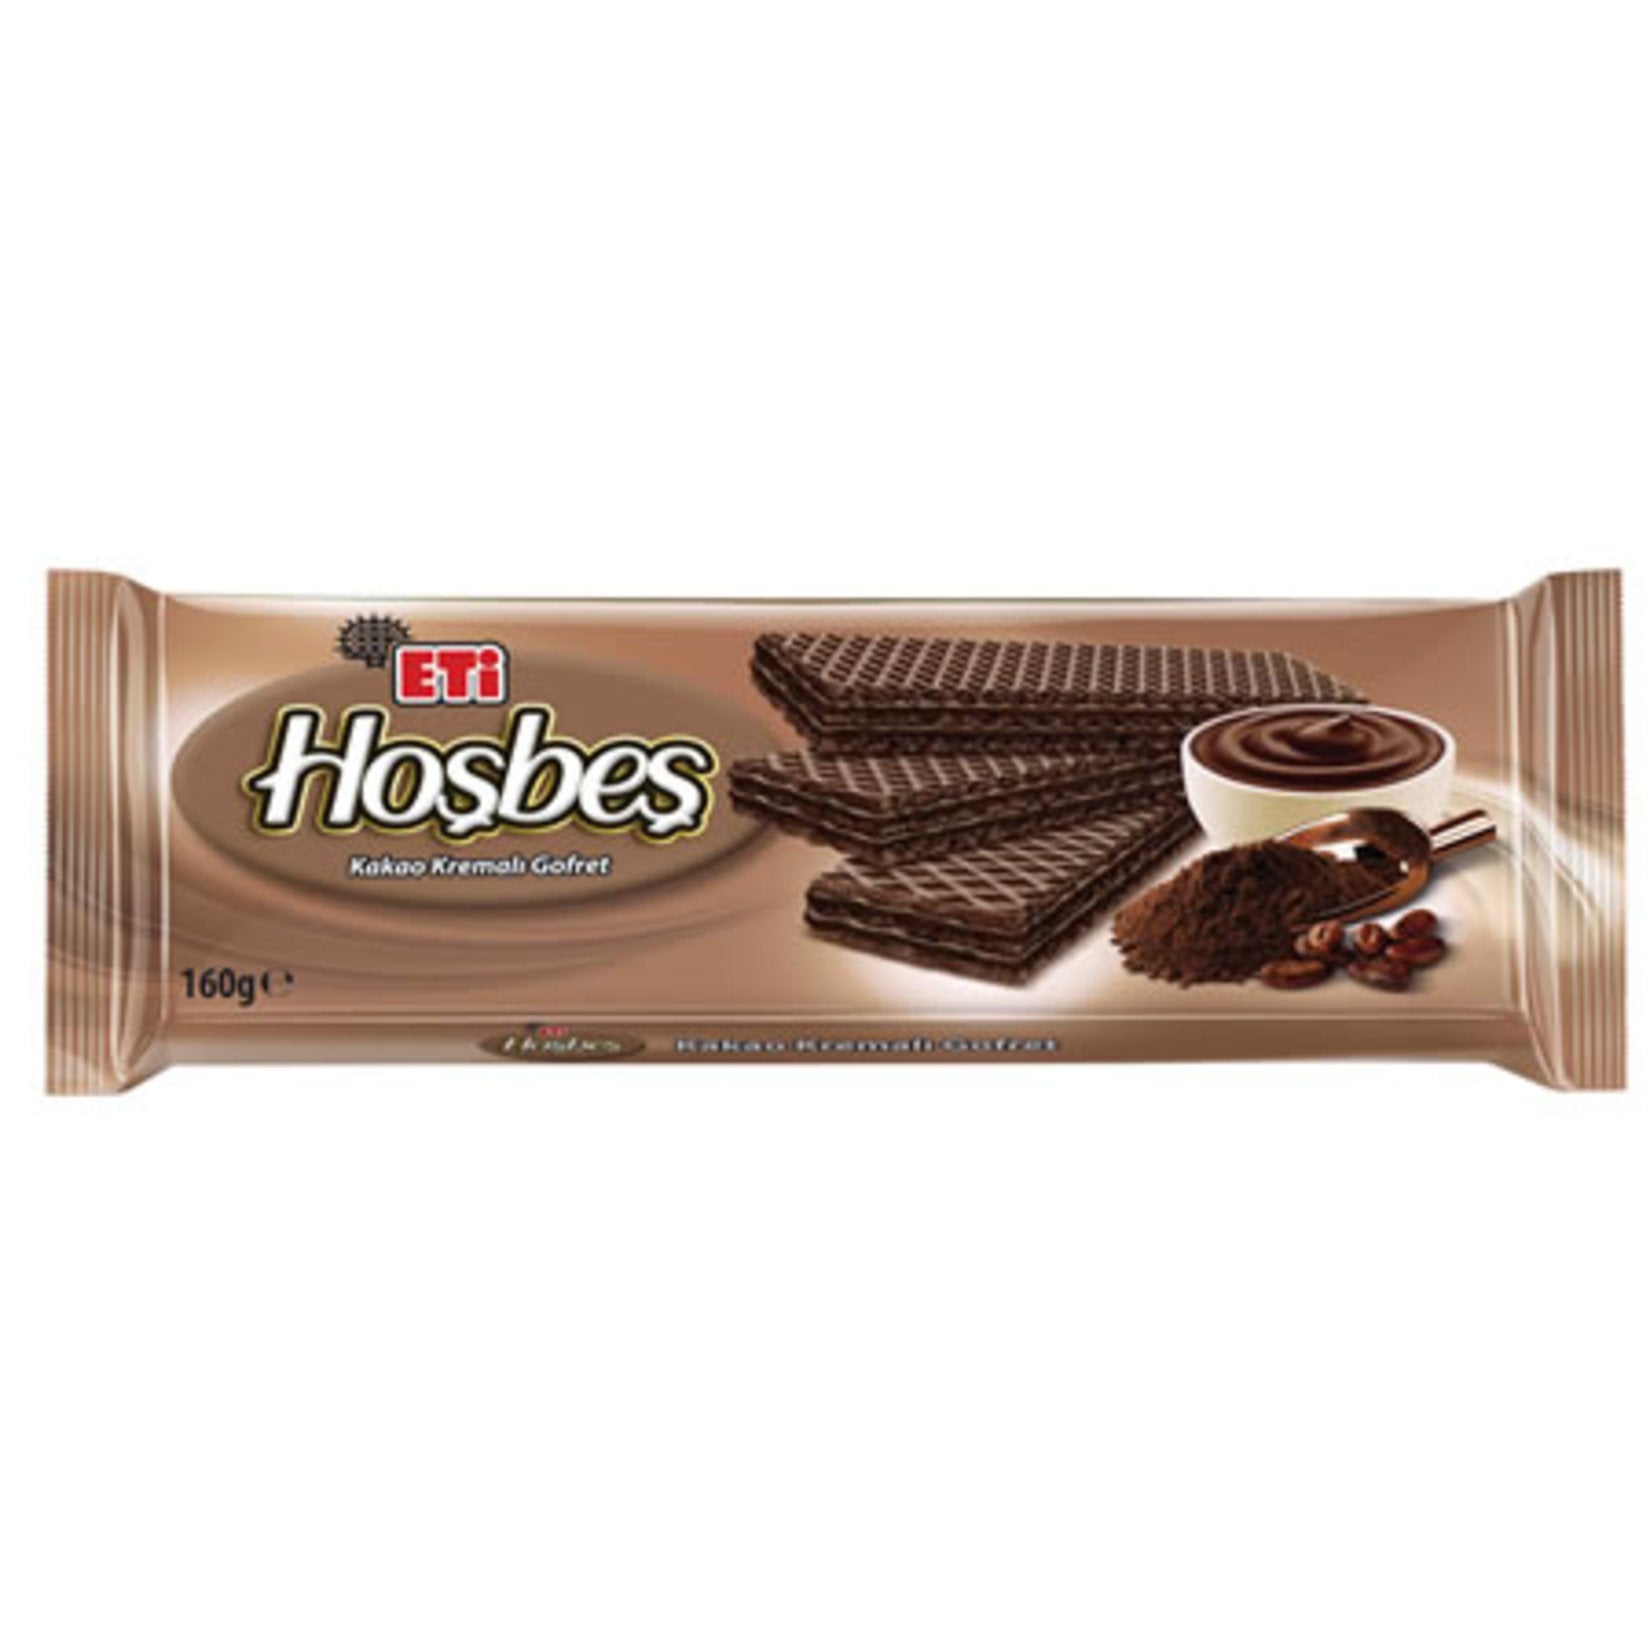 Eti Wafe Up (Ho?be?) Wafer with Cocoa Cream 142 G